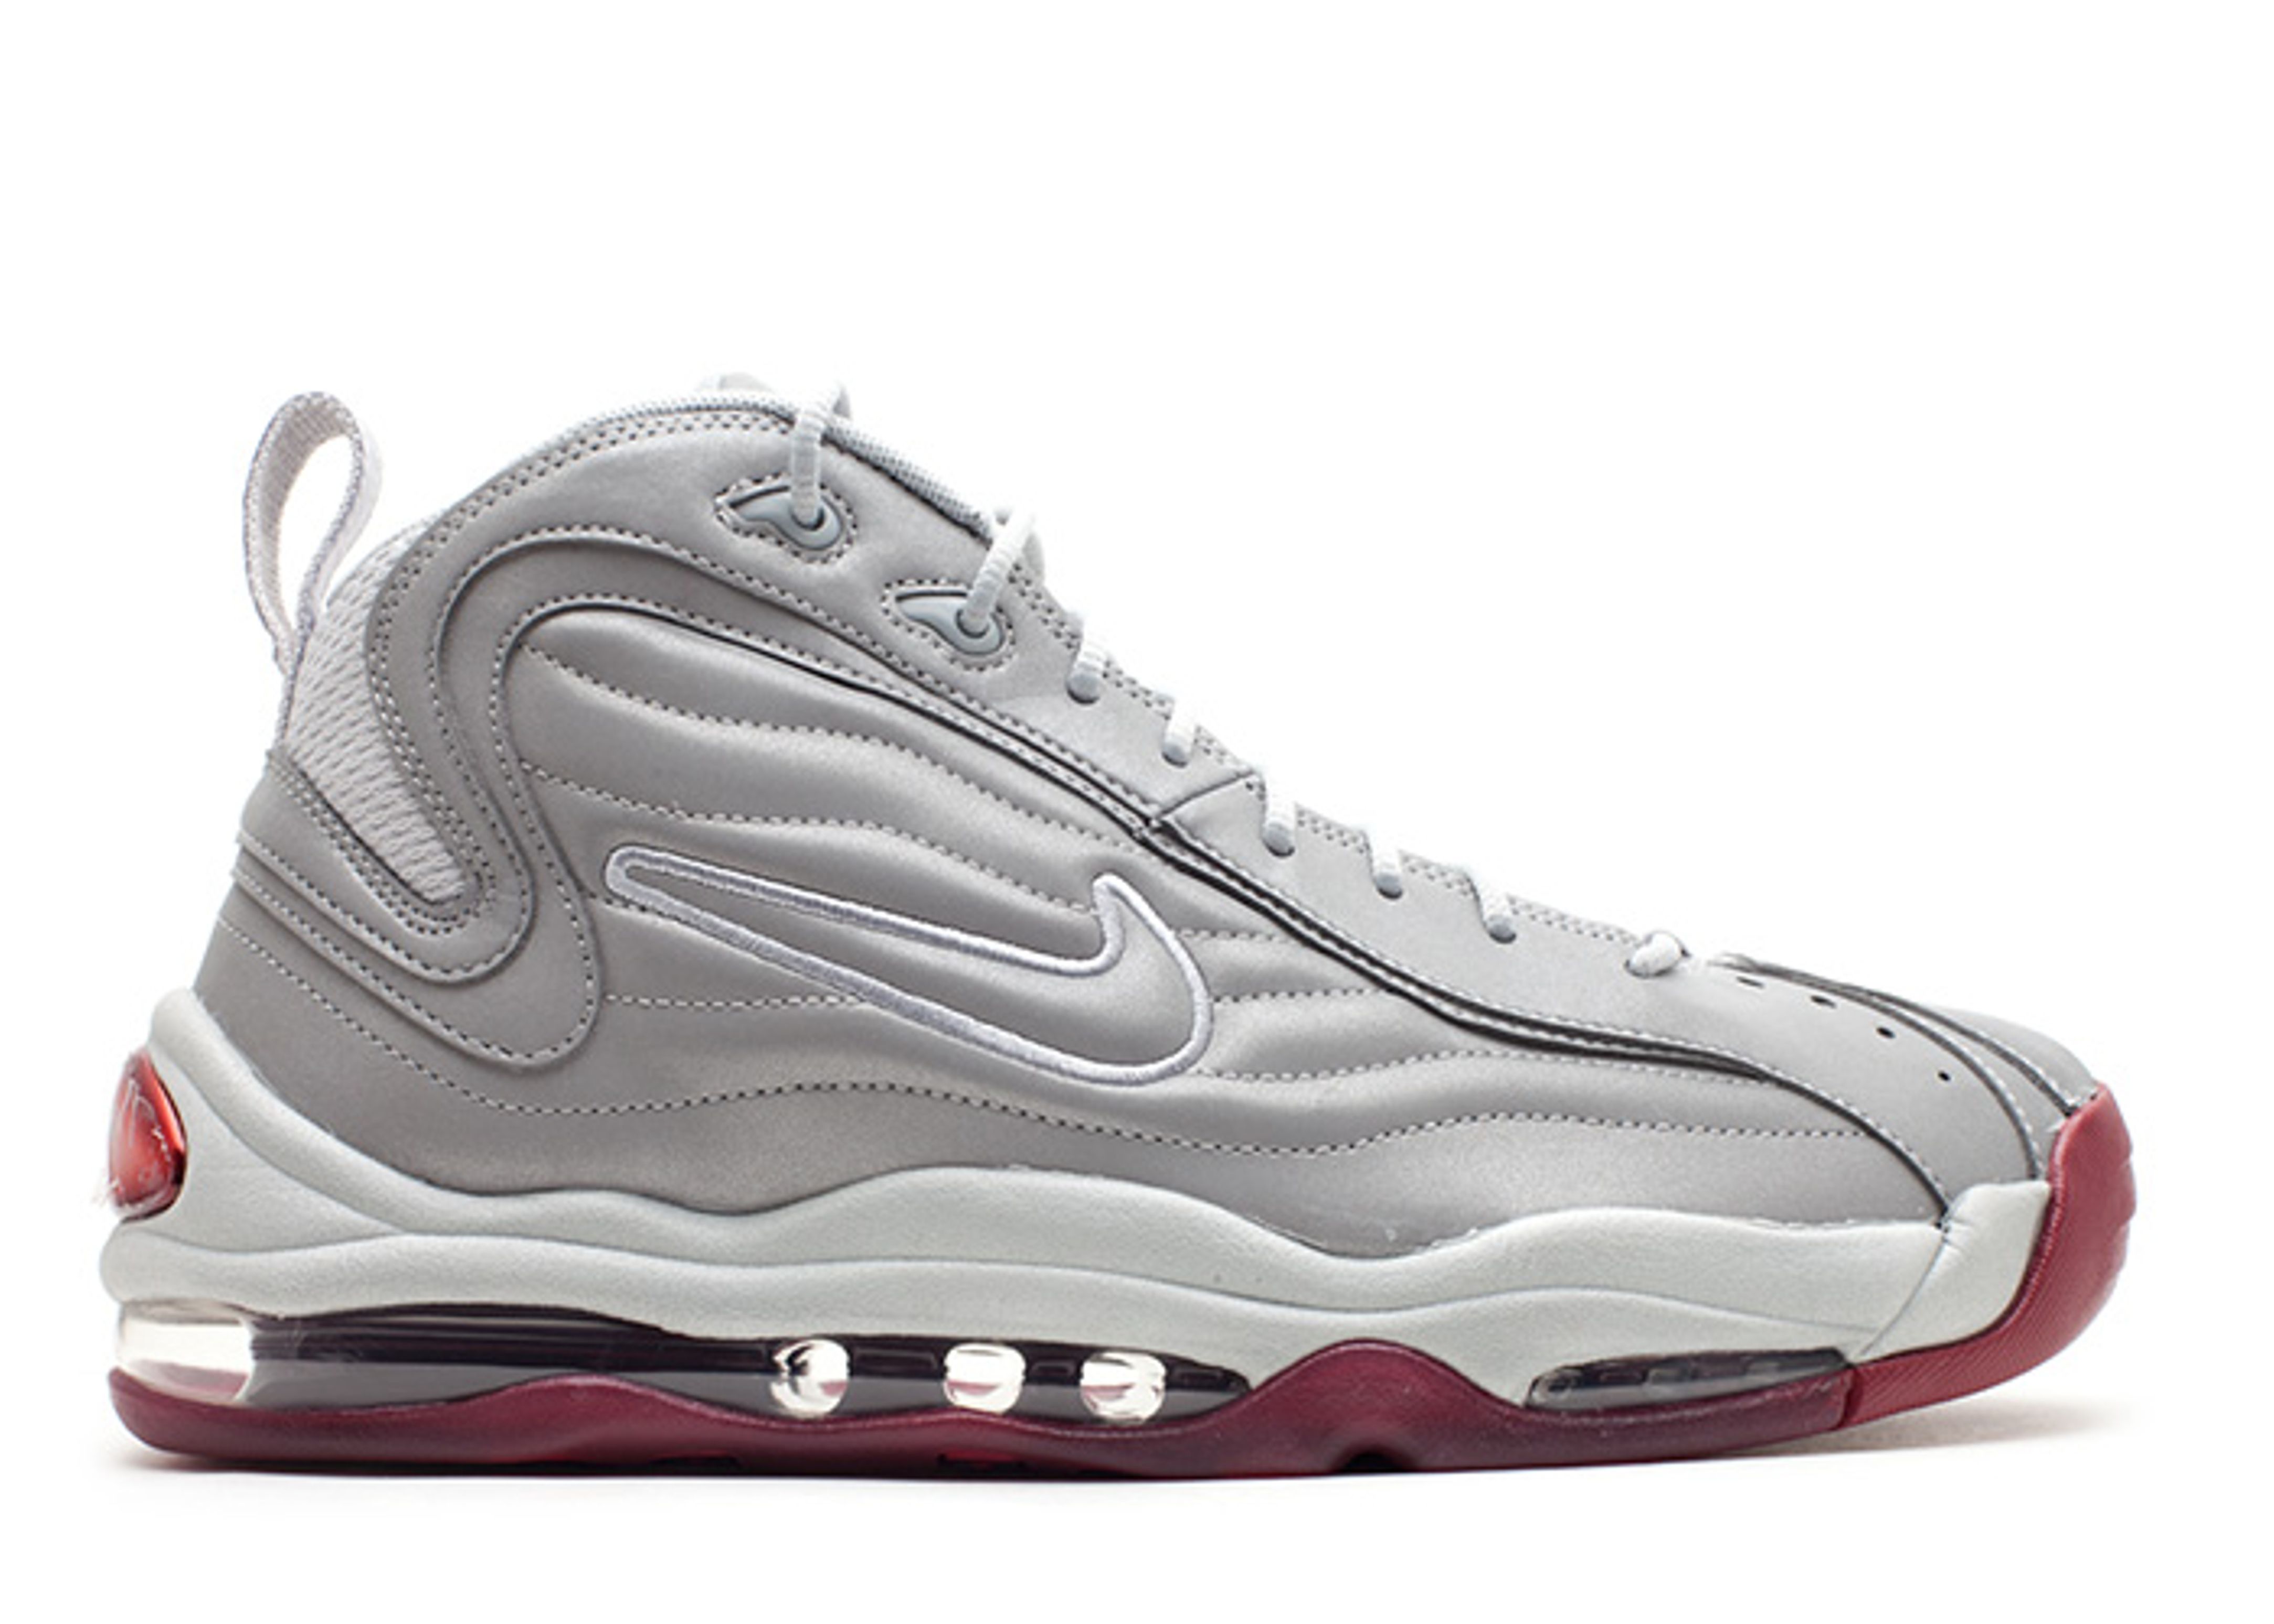 nike air total max uptempo online